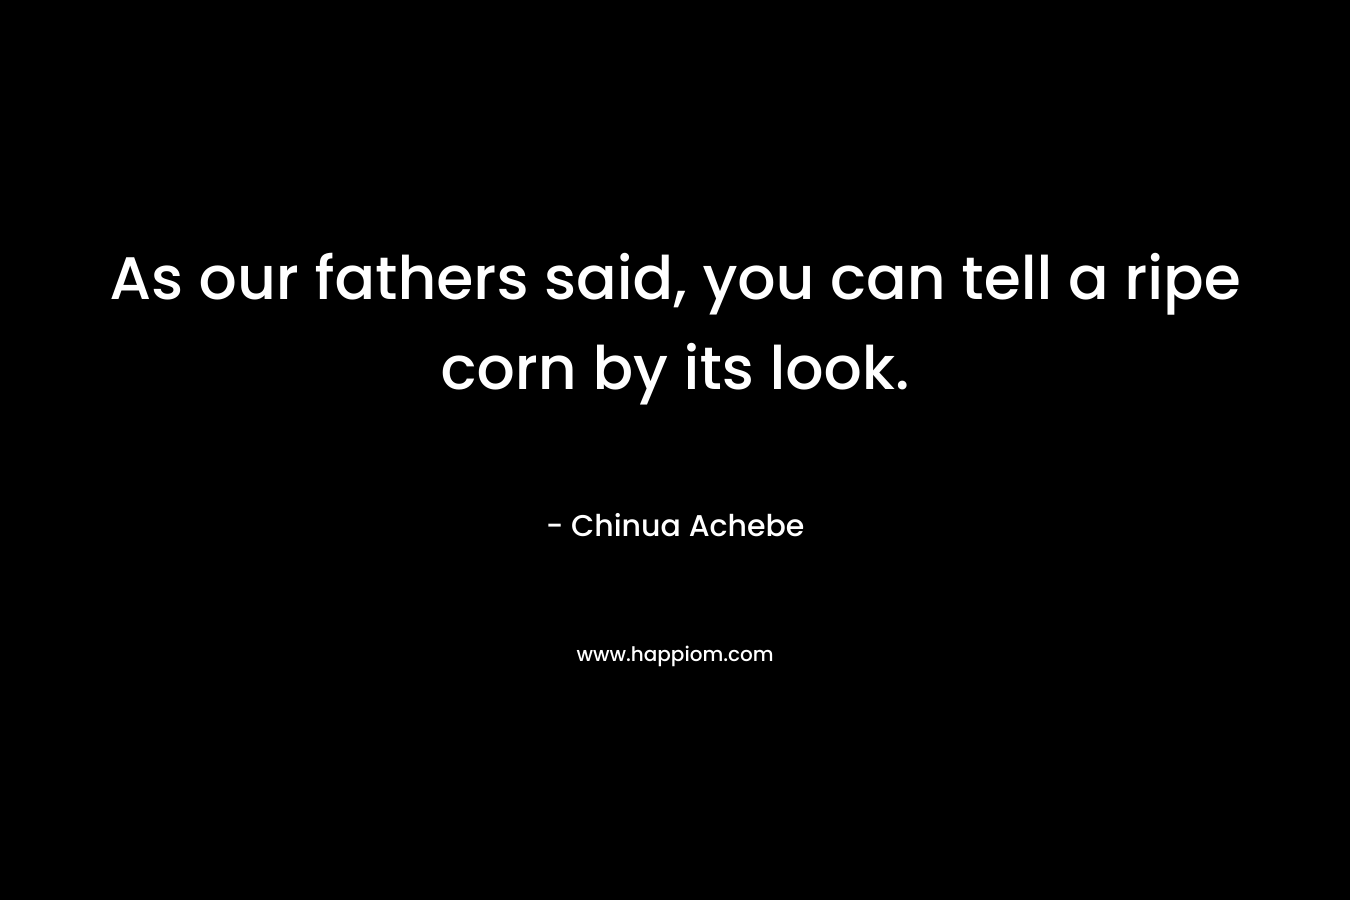 As our fathers said, you can tell a ripe corn by its look. – Chinua Achebe